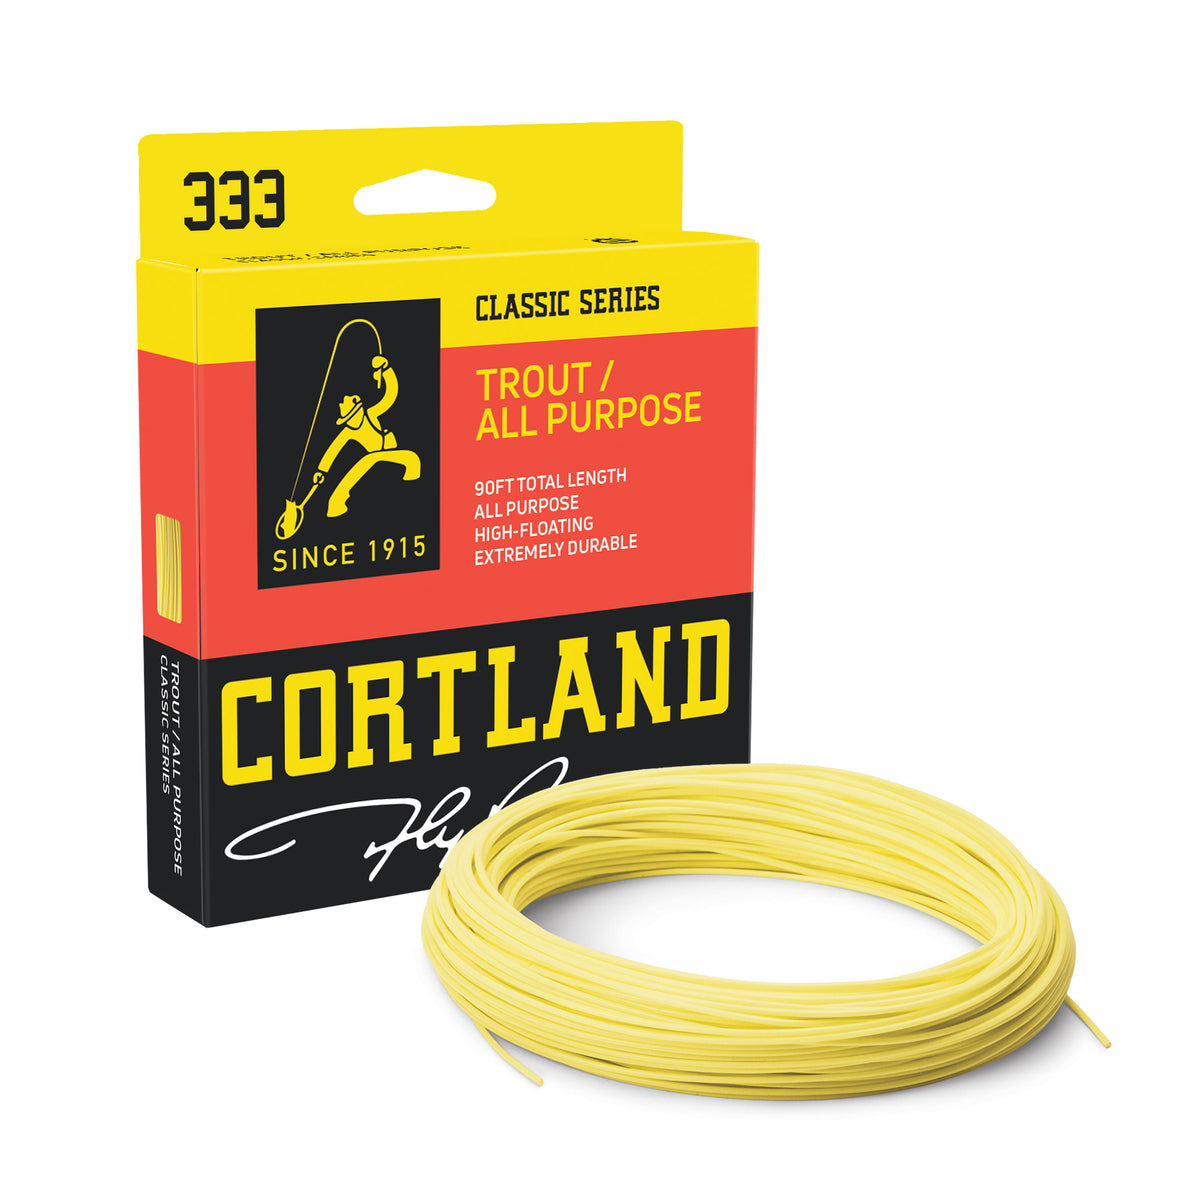 333 Trout All Purpose Freshwater Fly Line | Cortland Line 